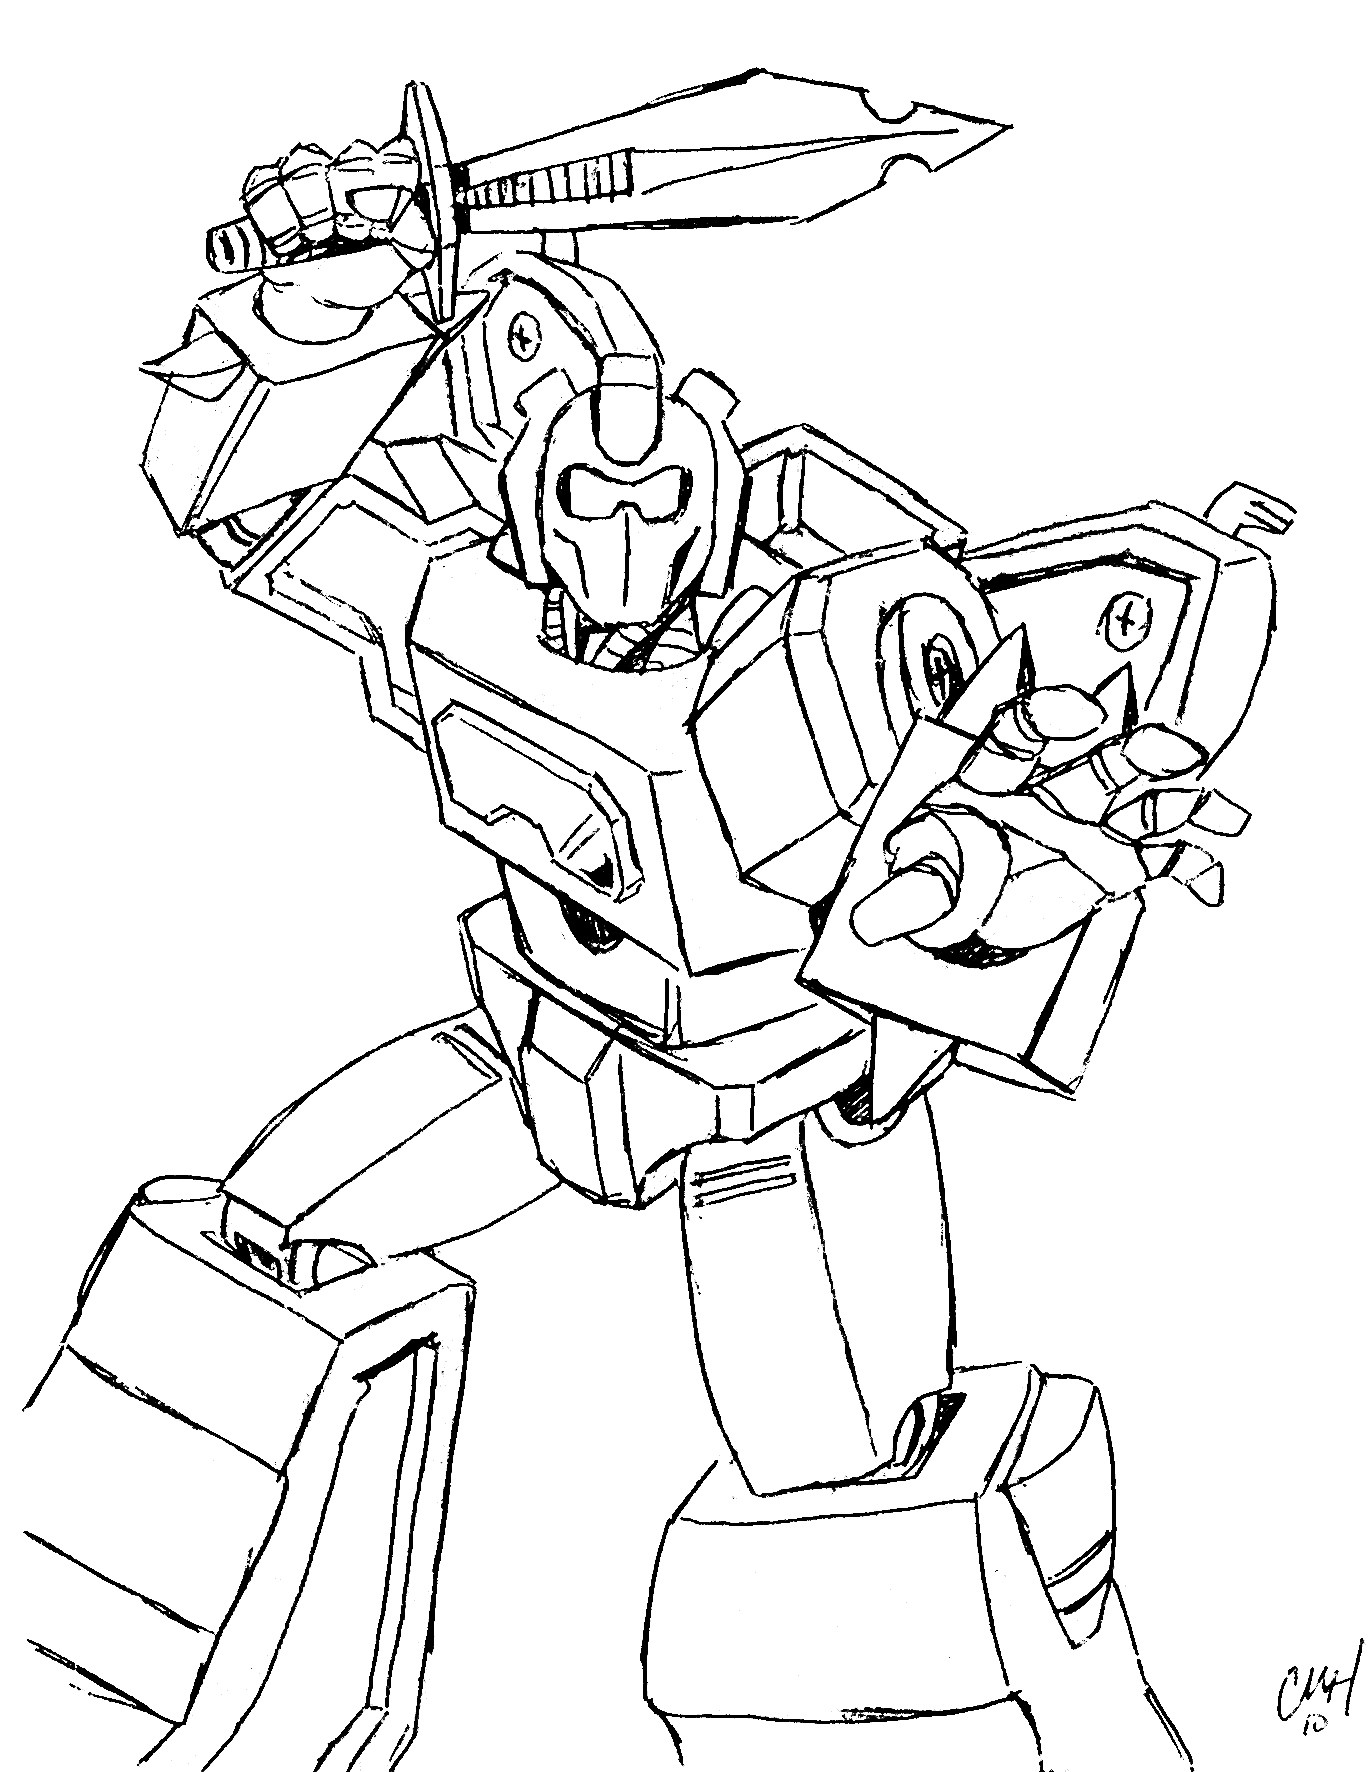 Free Printable Transformers Coloring Pages For Kids Effy Moom Free Coloring Picture wallpaper give a chance to color on the wall without getting in trouble! Fill the walls of your home or office with stress-relieving [effymoom.blogspot.com]